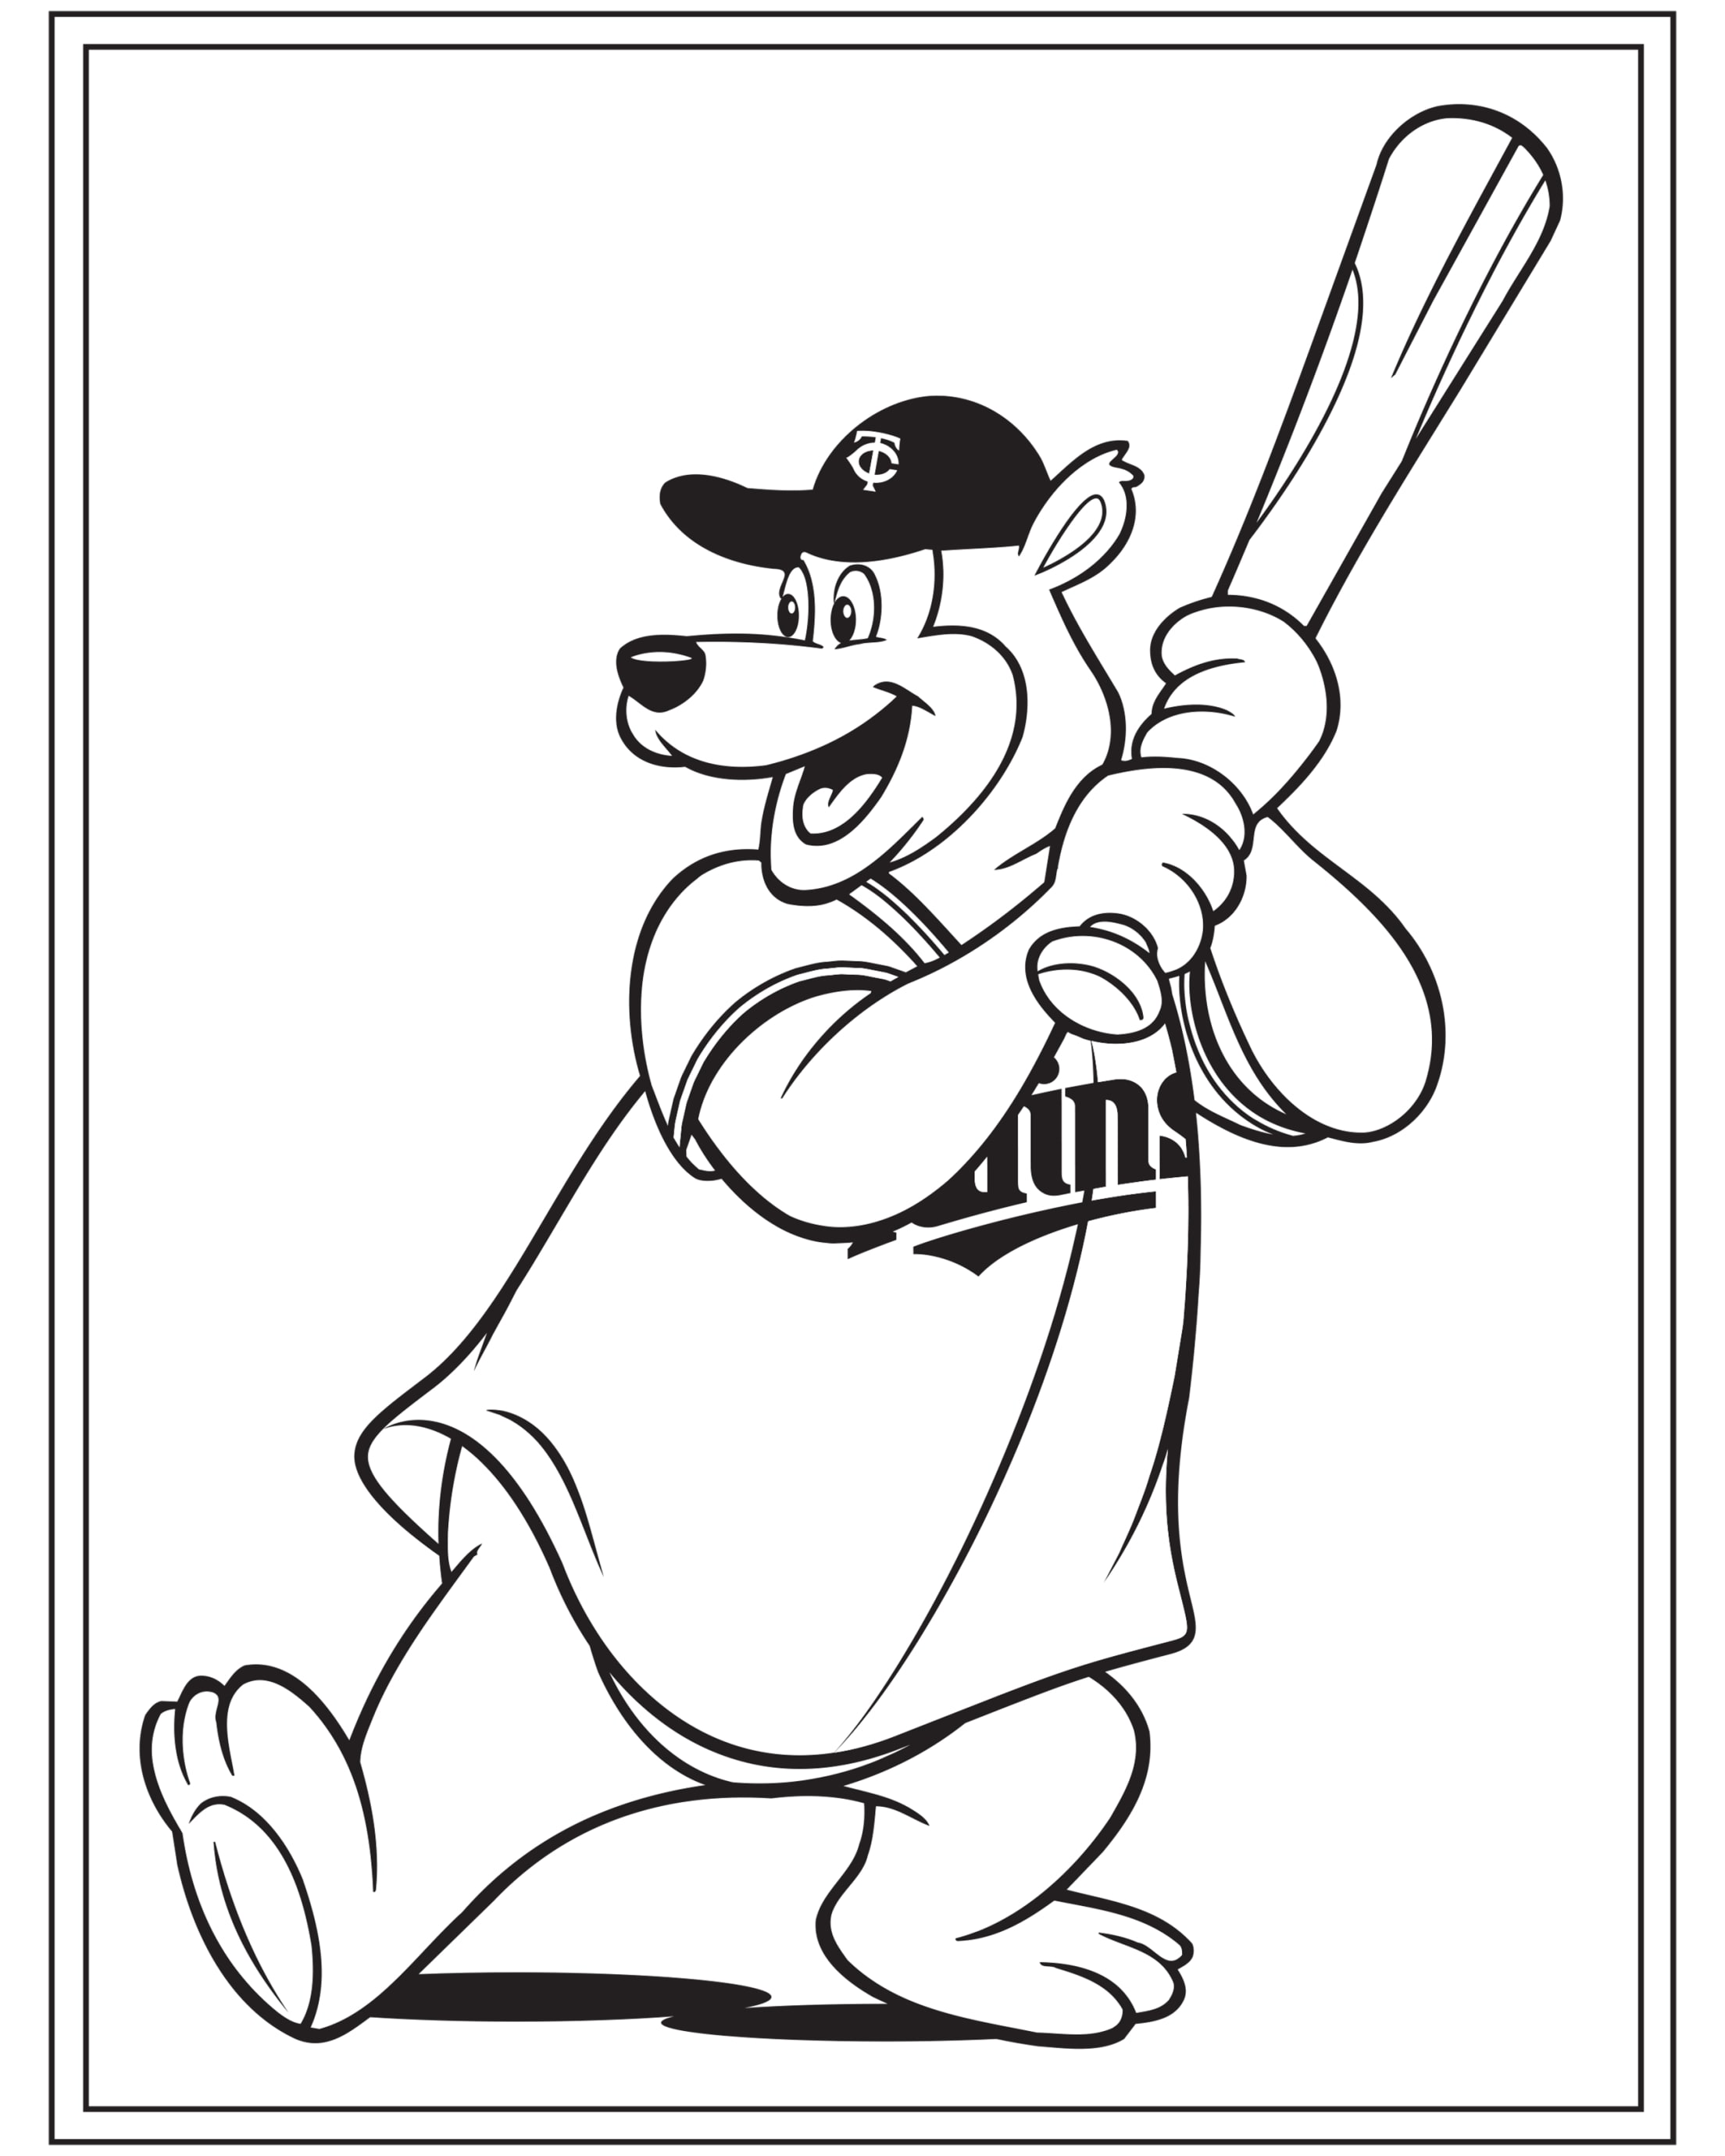 Kids coloring pages minnesota twins